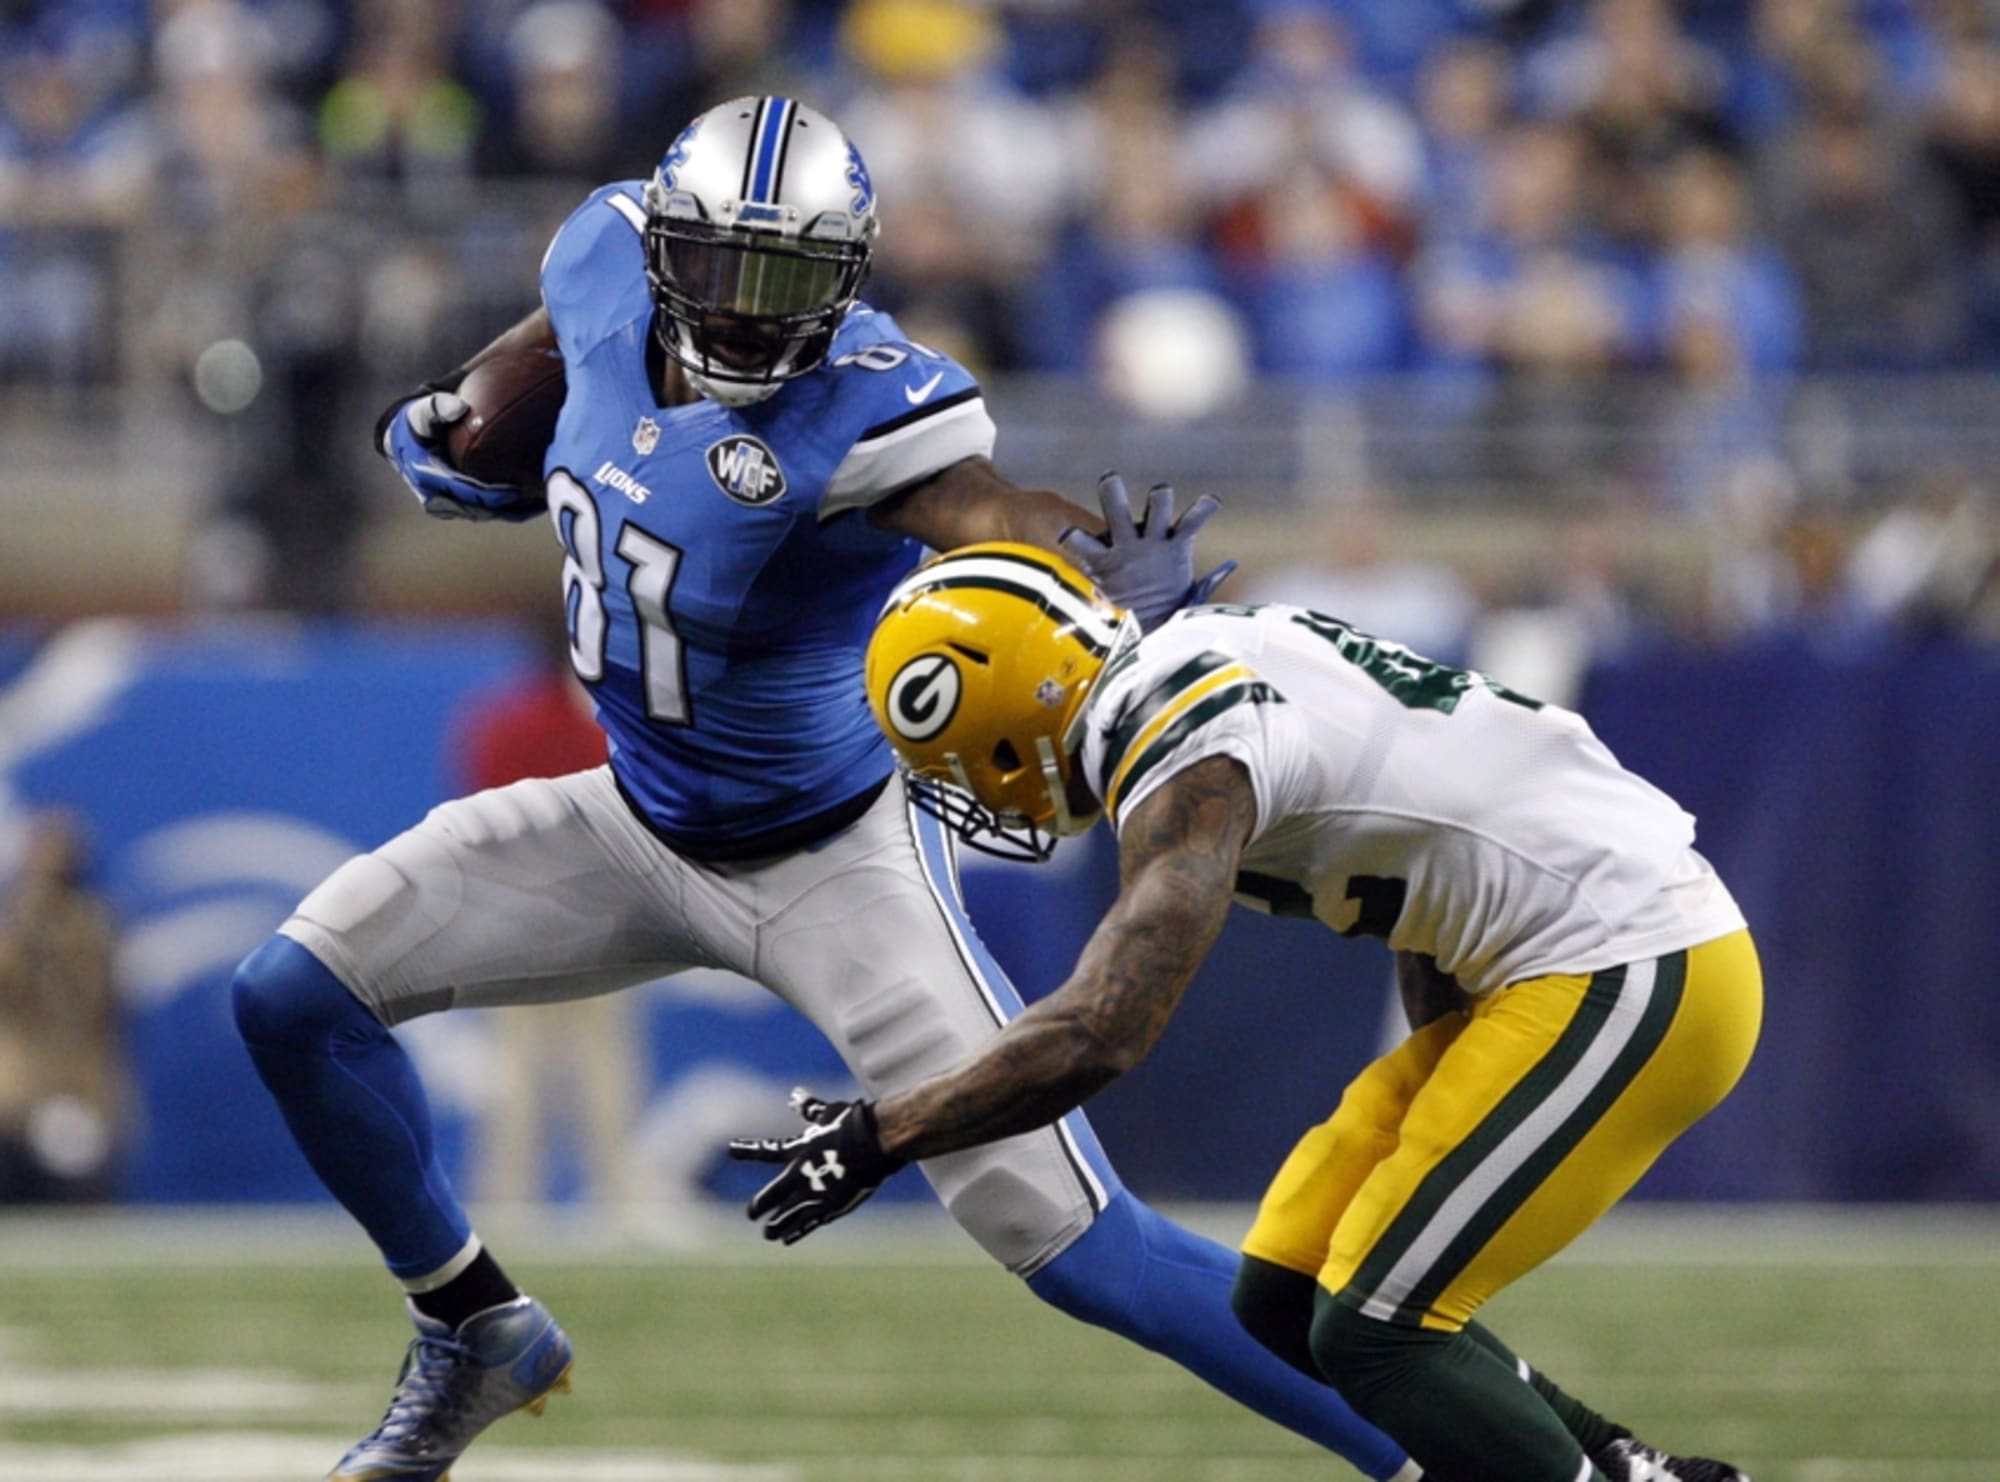 Calvin Johnson would be a great catch for Patriots, but it seems